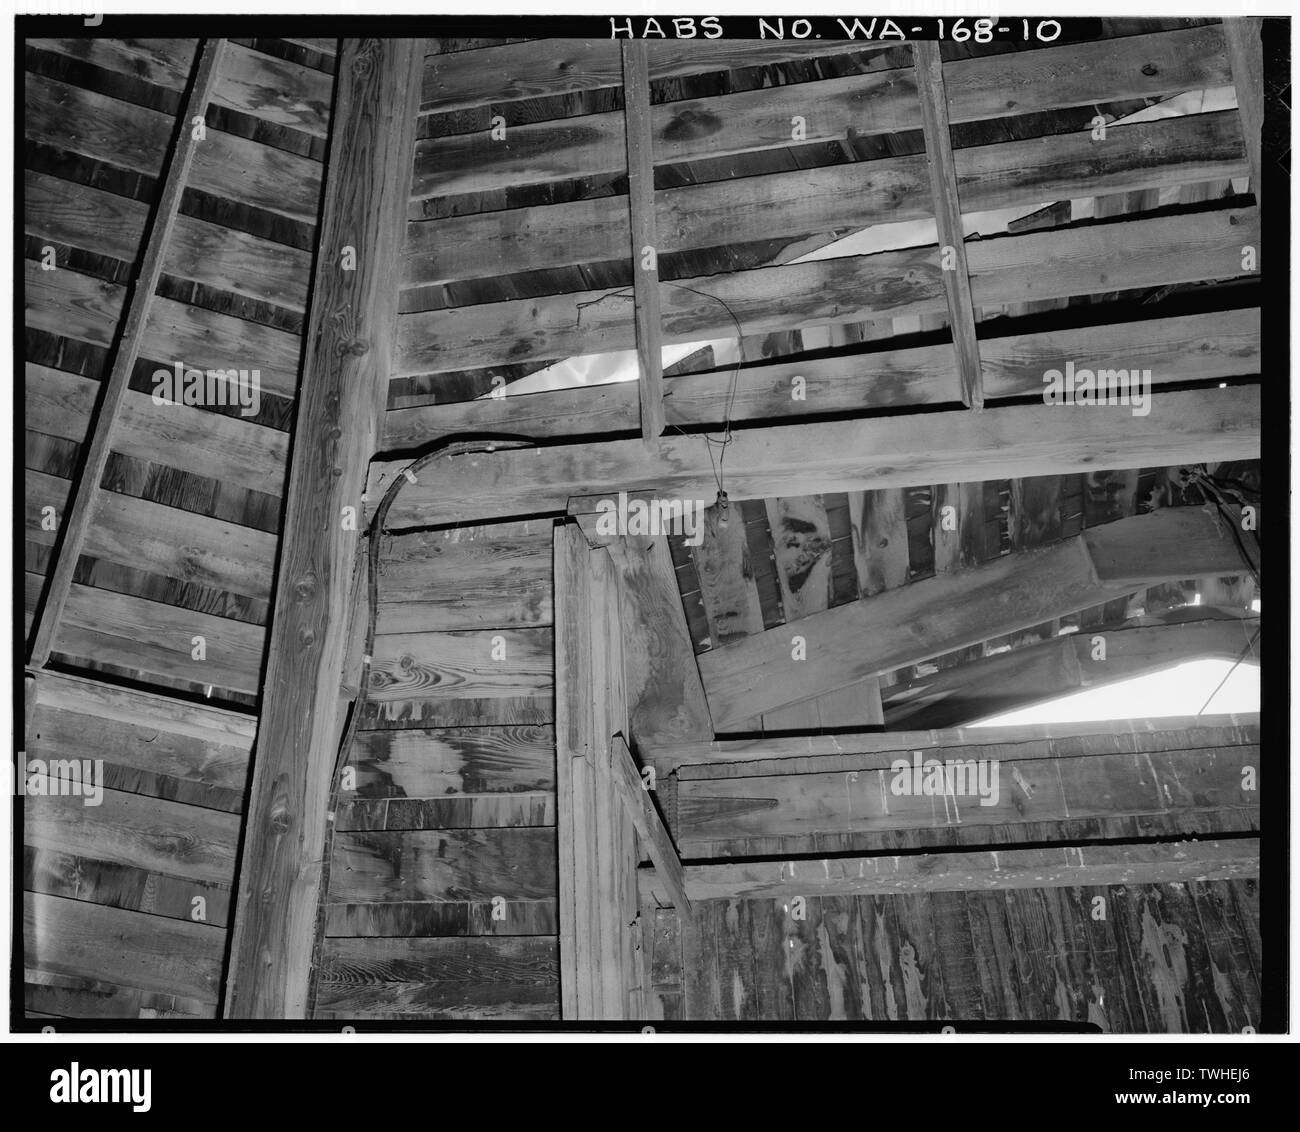 SECOND FLOOR INTERIOR, DORMER AND ROOF JOINERY, HORIZONTAL COMPOSITION - T. A. Leonard Barn, Old Moscow Highway, Pullman, Whitman County, WA; Cline, James H; Rudd, J William, project manager; Washington State University, School of Architecture, sponsor; Nys, Steven Eric, delineator; Burger, David M, delineator Stock Photo